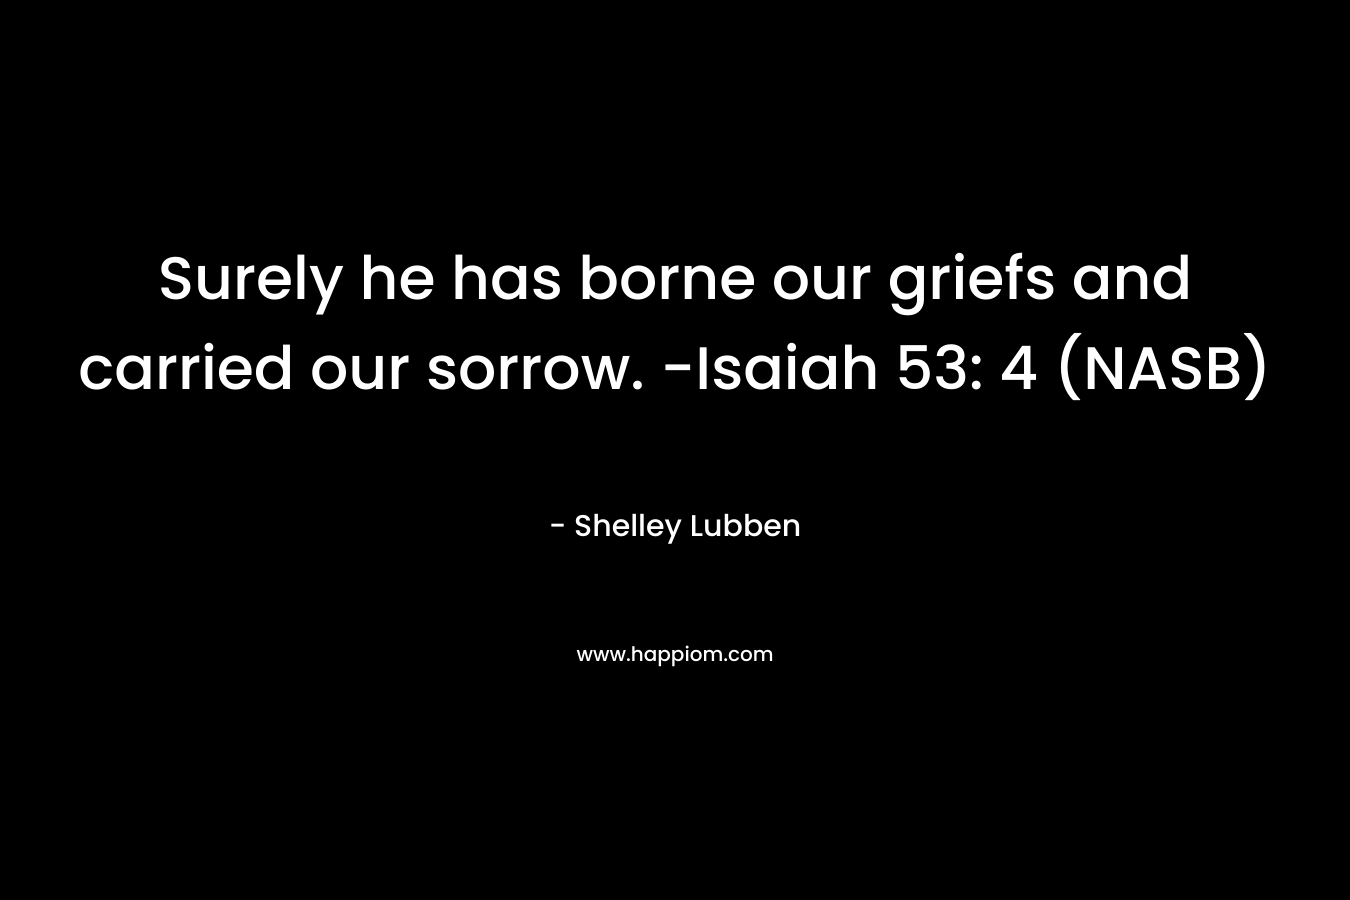 Surely he has borne our griefs and carried our sorrow. -Isaiah 53: 4 (NASB) – Shelley Lubben